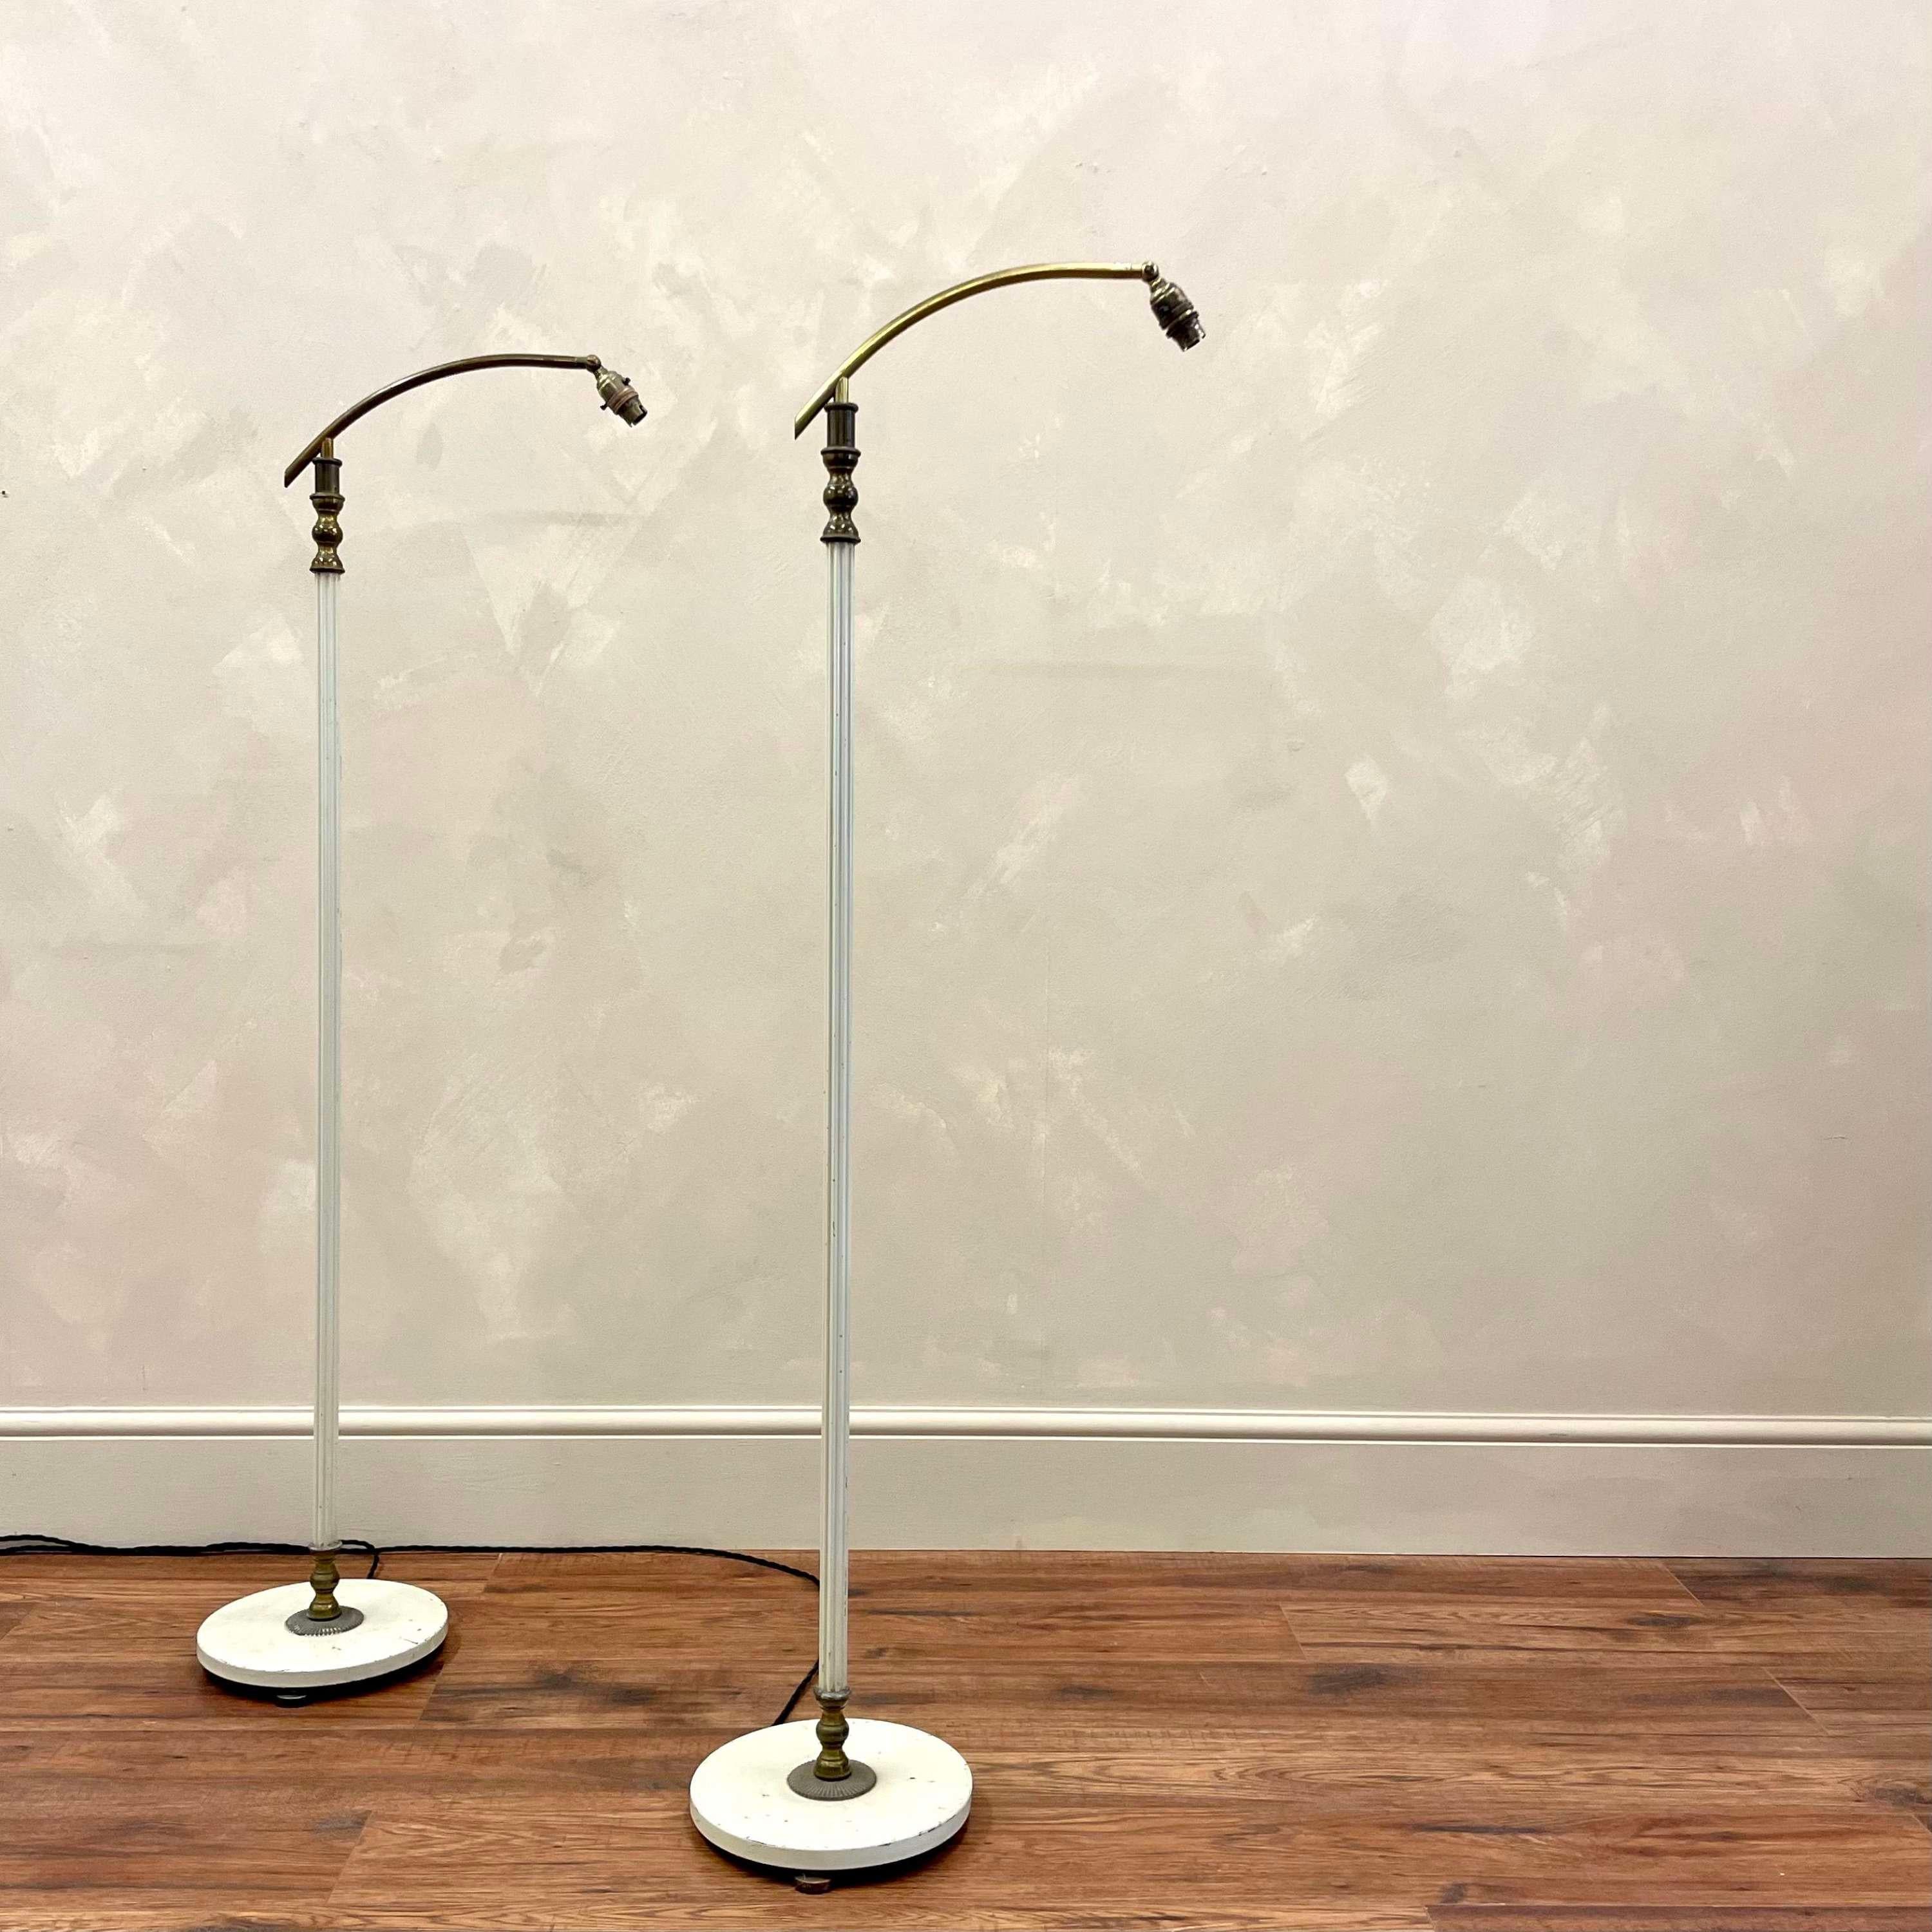 Pair of French mid century standard lamps.
With off white reeded stems leading to curved brass bulb arms. 
Extendable heights from 135cm to 163cm.
Newly wired and PAT tested.
Dimensions:H: 163cm (64.2